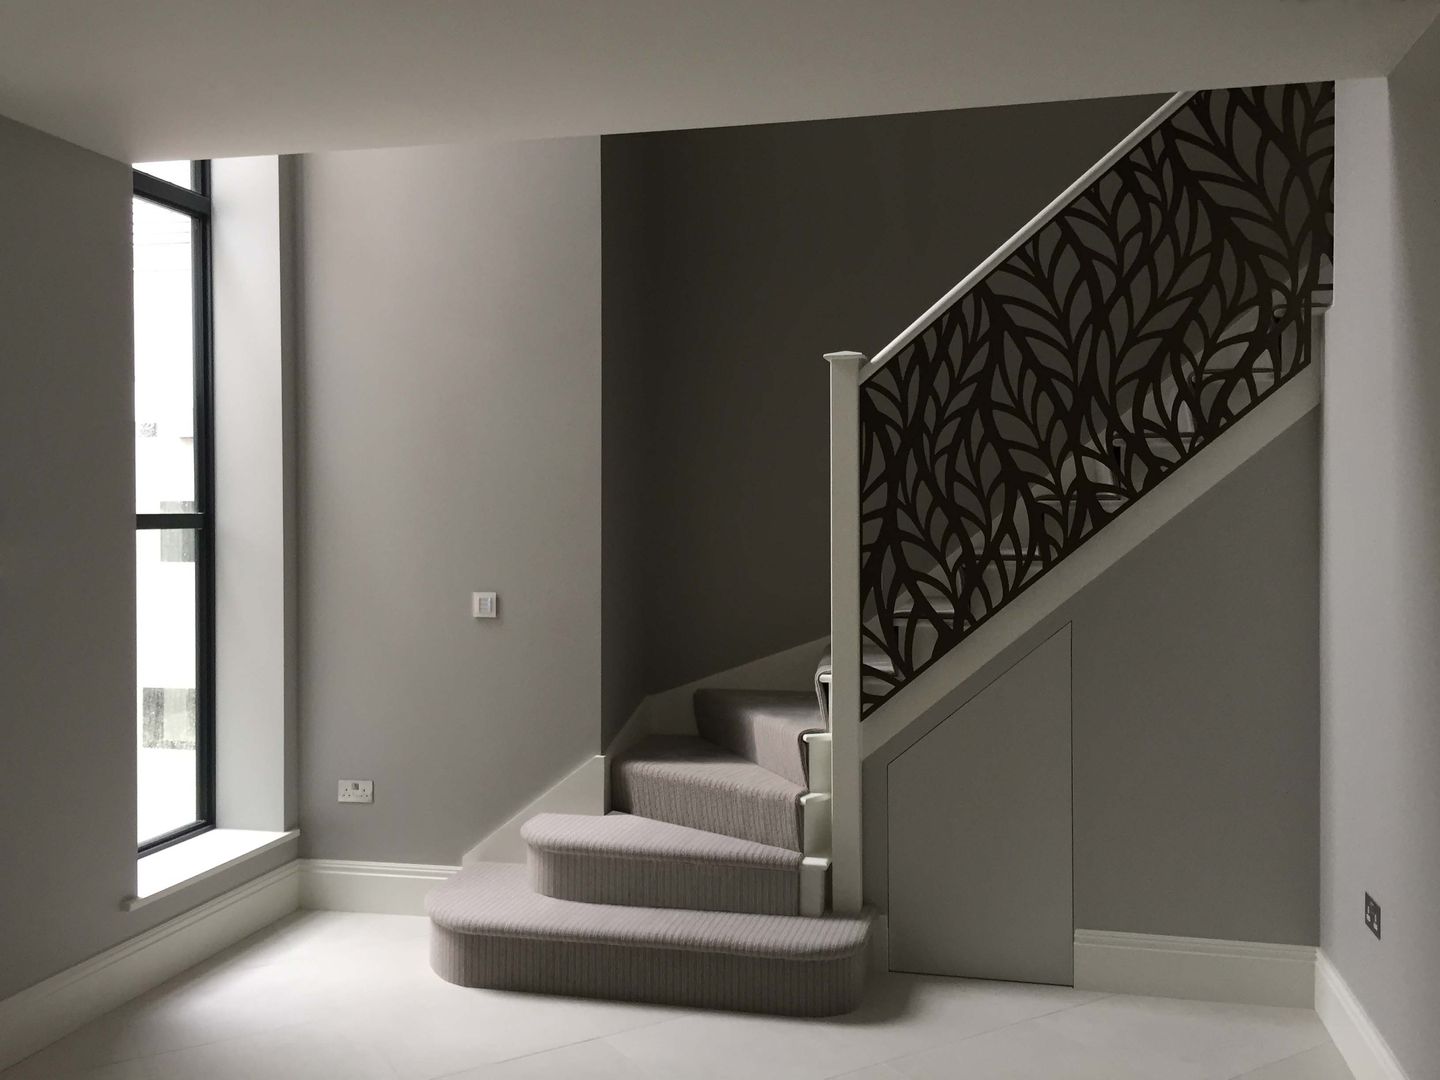 Laser cut screens - Regents Park balustrade. miles and lincoln Modern corridor, hallway & stairs balustrade,laser cut screens,laser cut panels